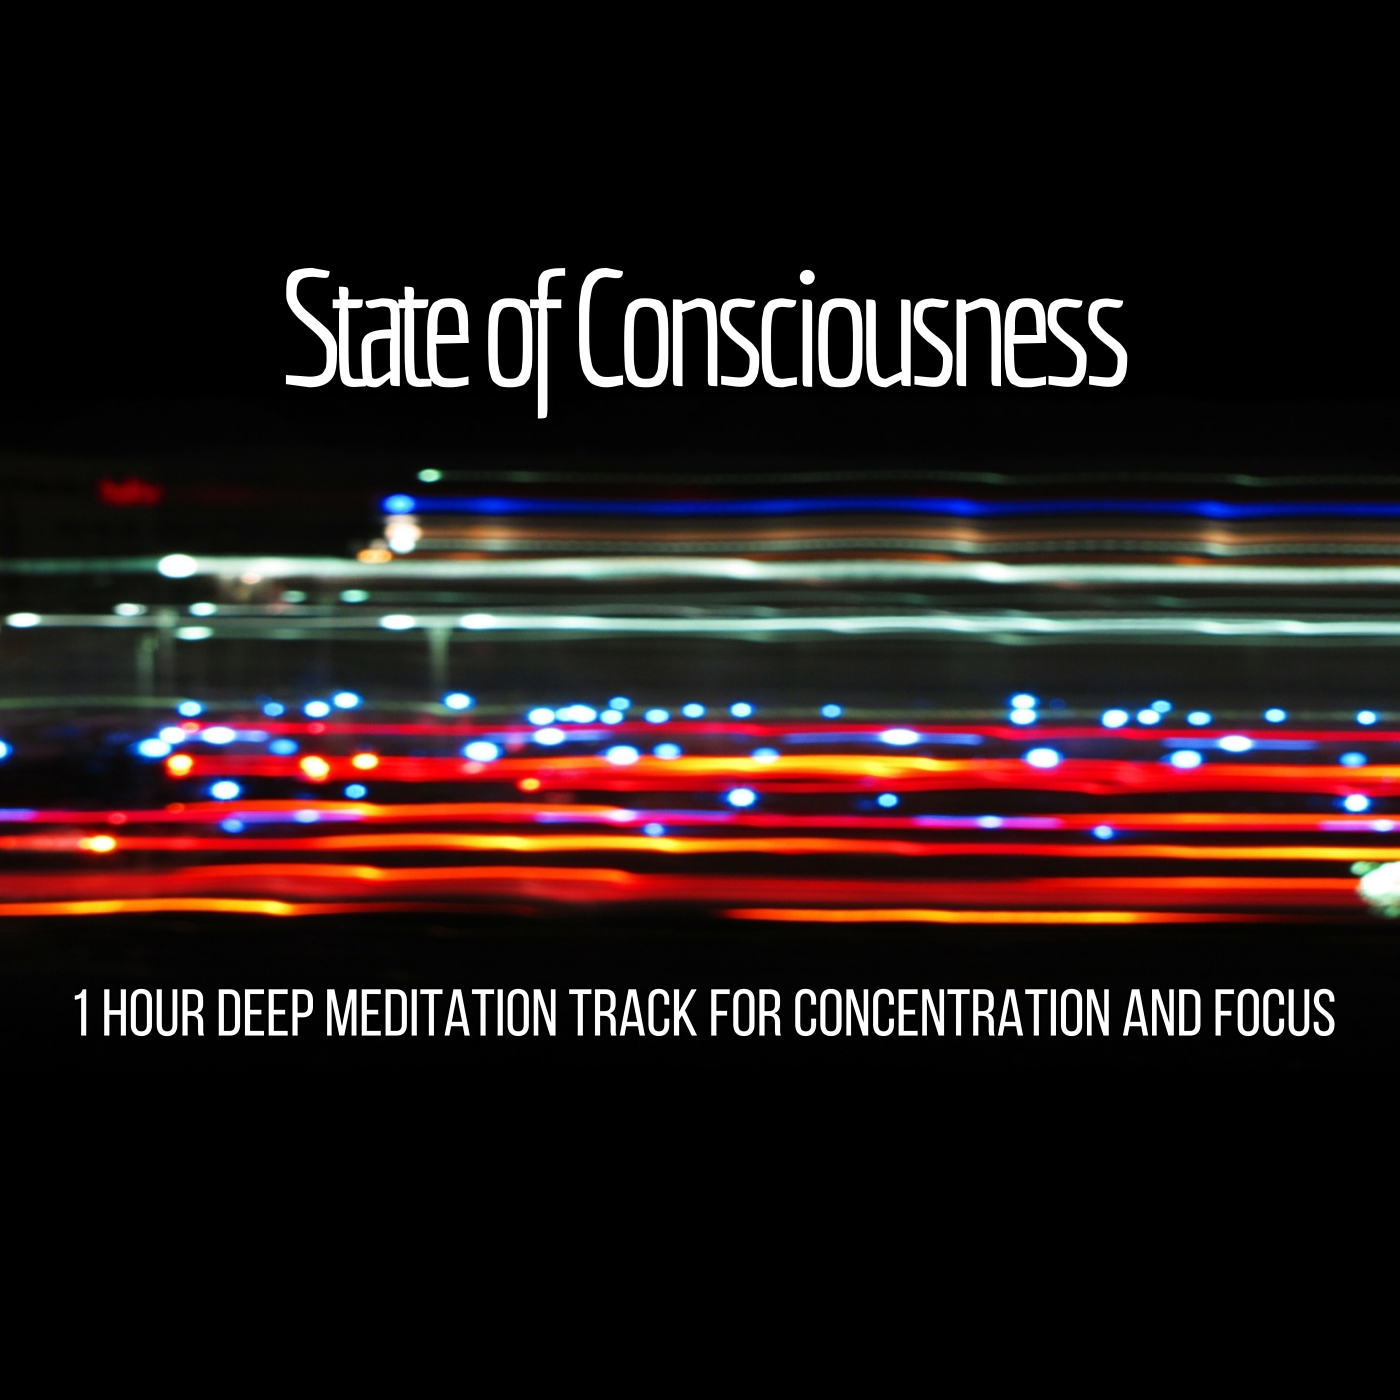 State of Consciousness - 1 Hour Deep Meditation Track for Concentration and Focus